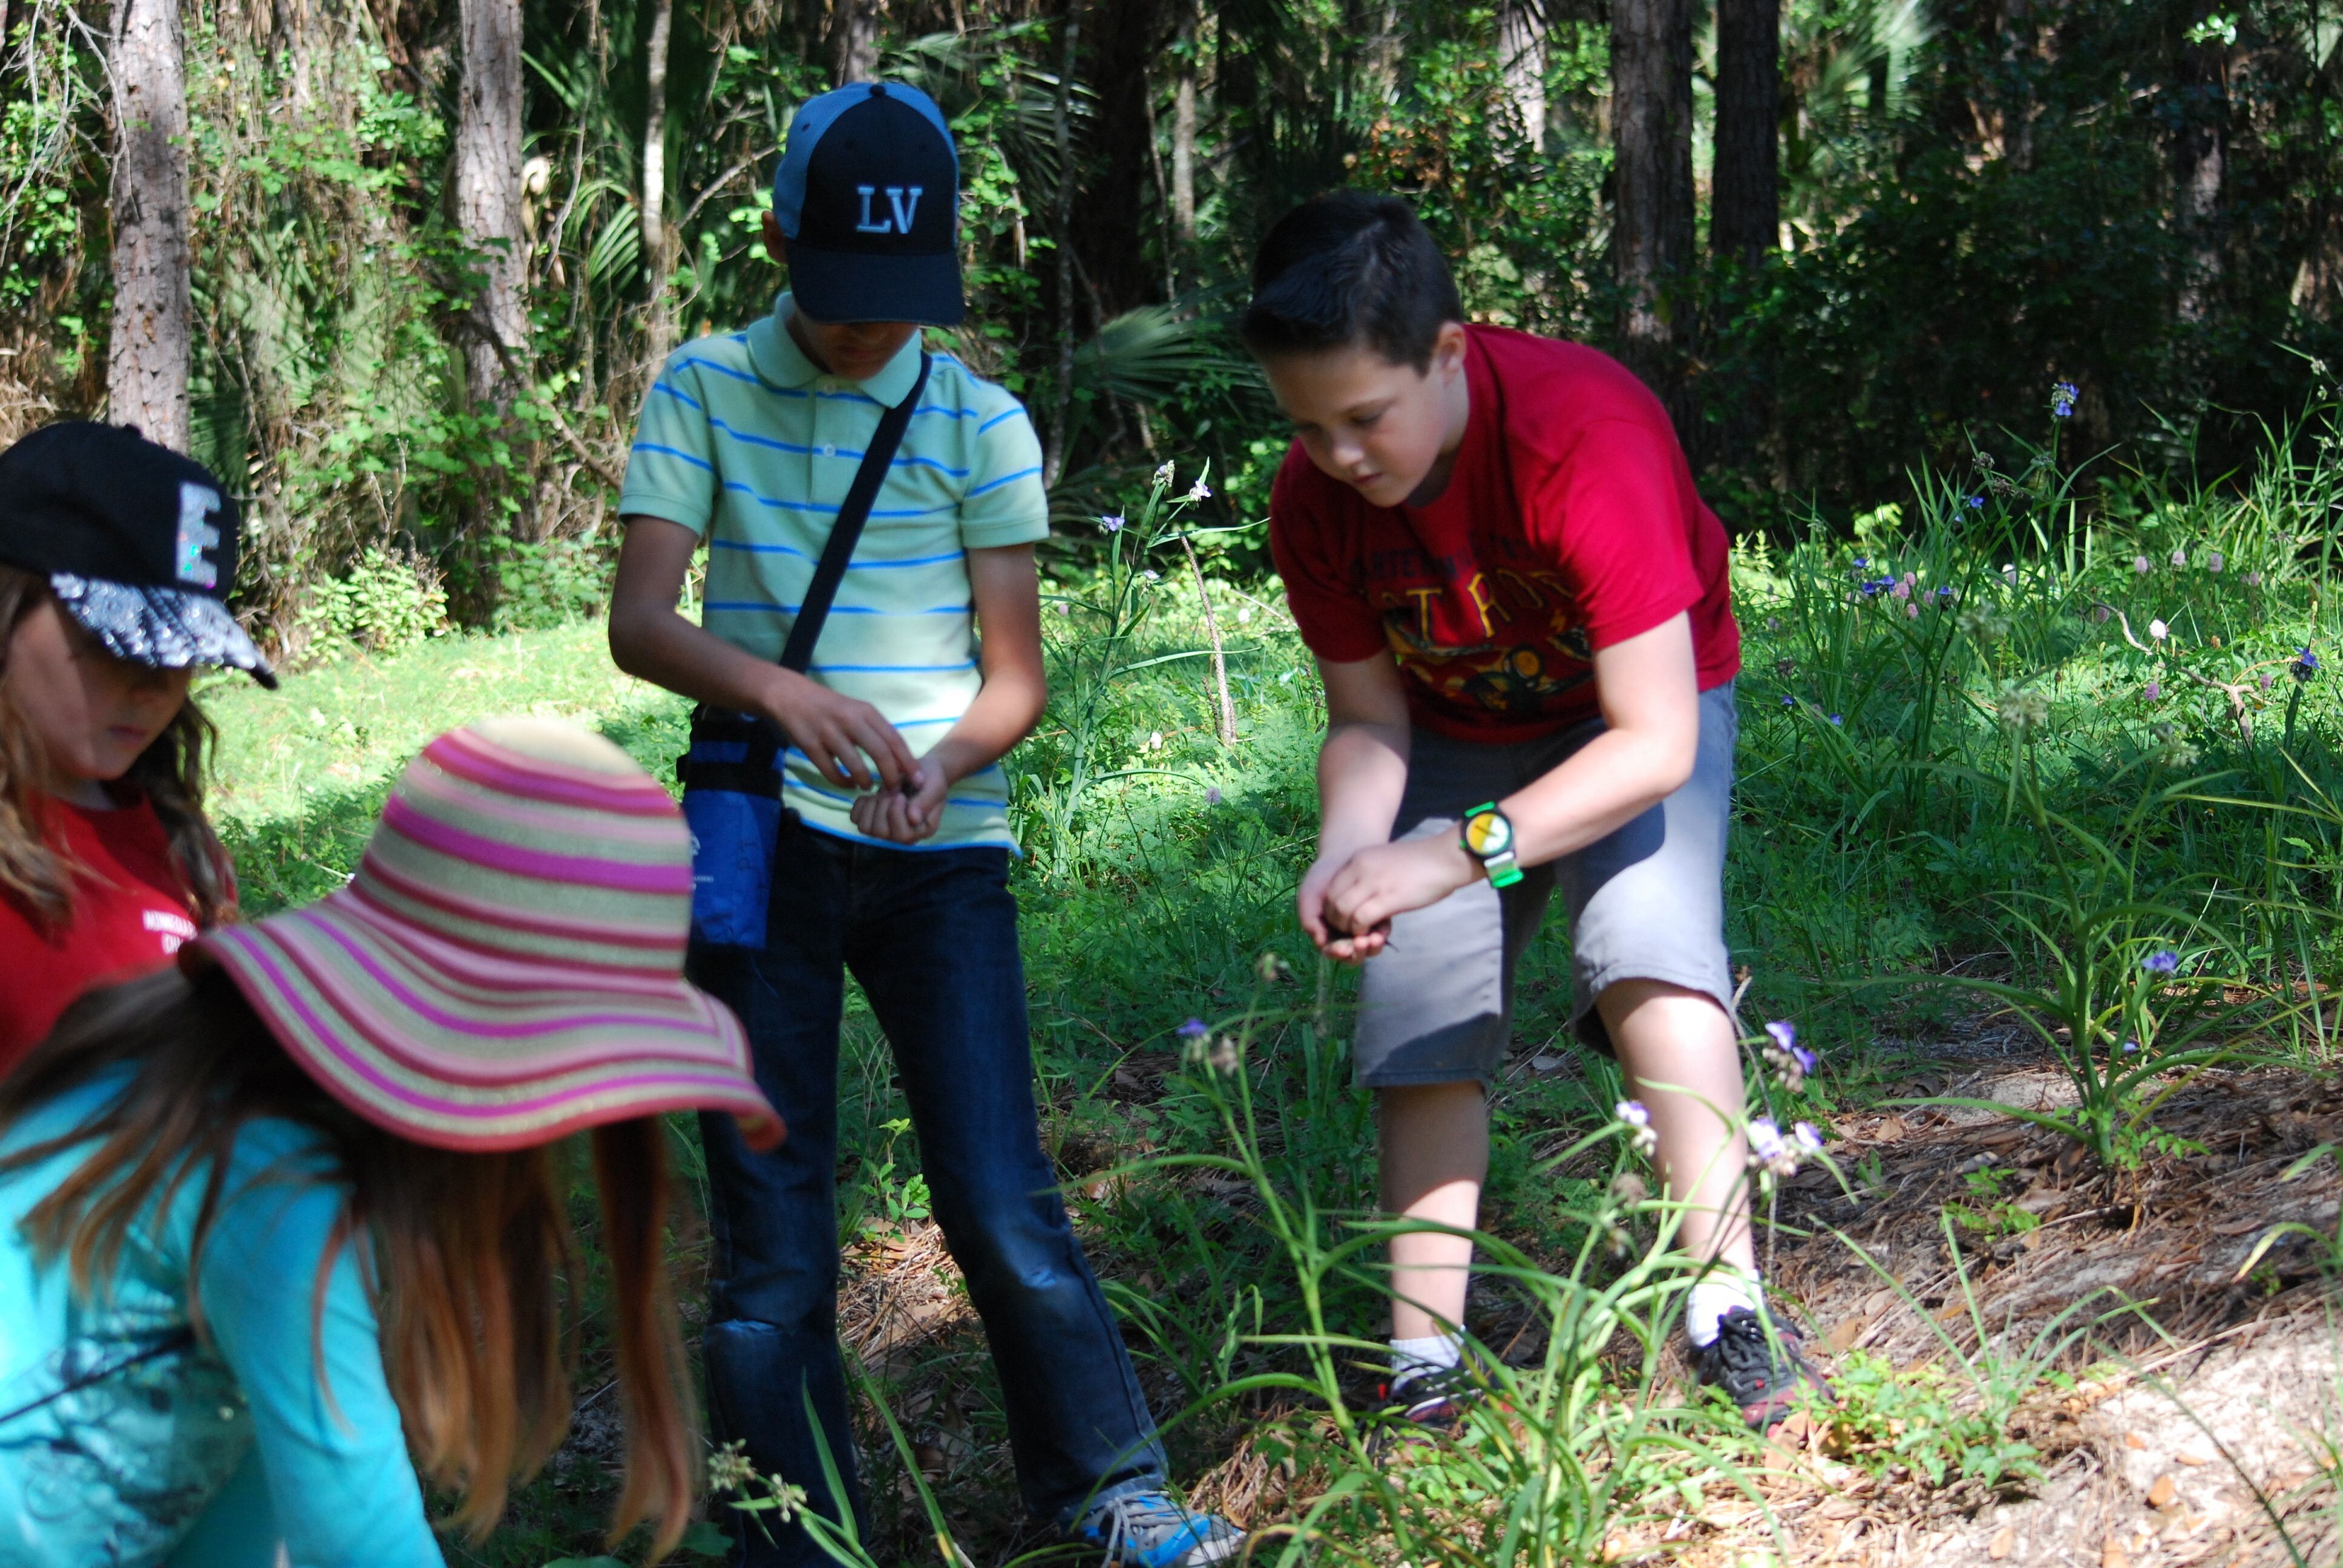 Students examing items found along one of the trails to the lake. 